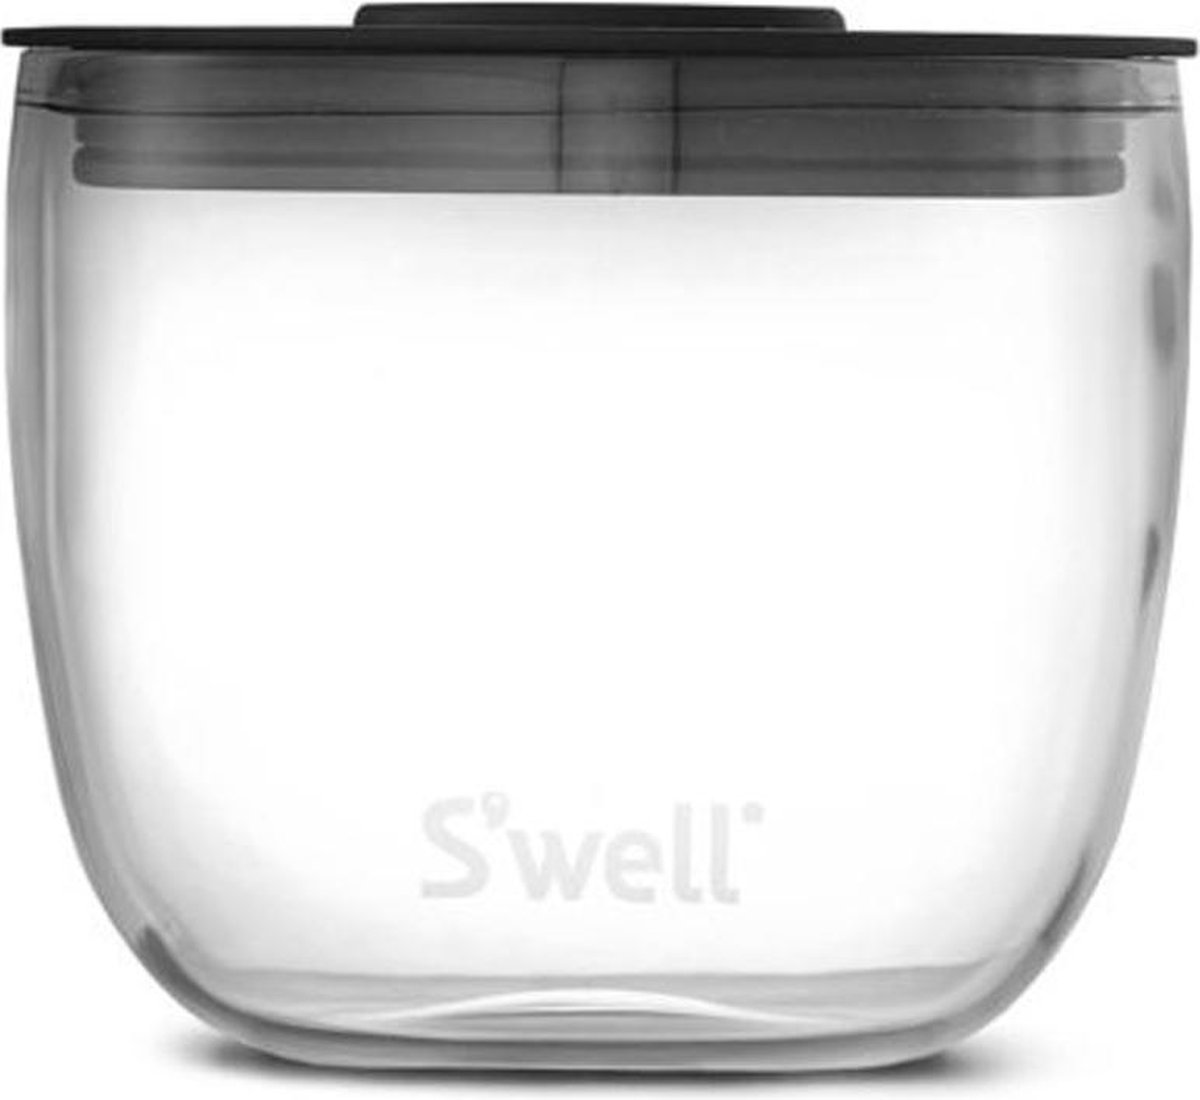 S'well Eats Prep Bowl for Foodbowl 414 ml